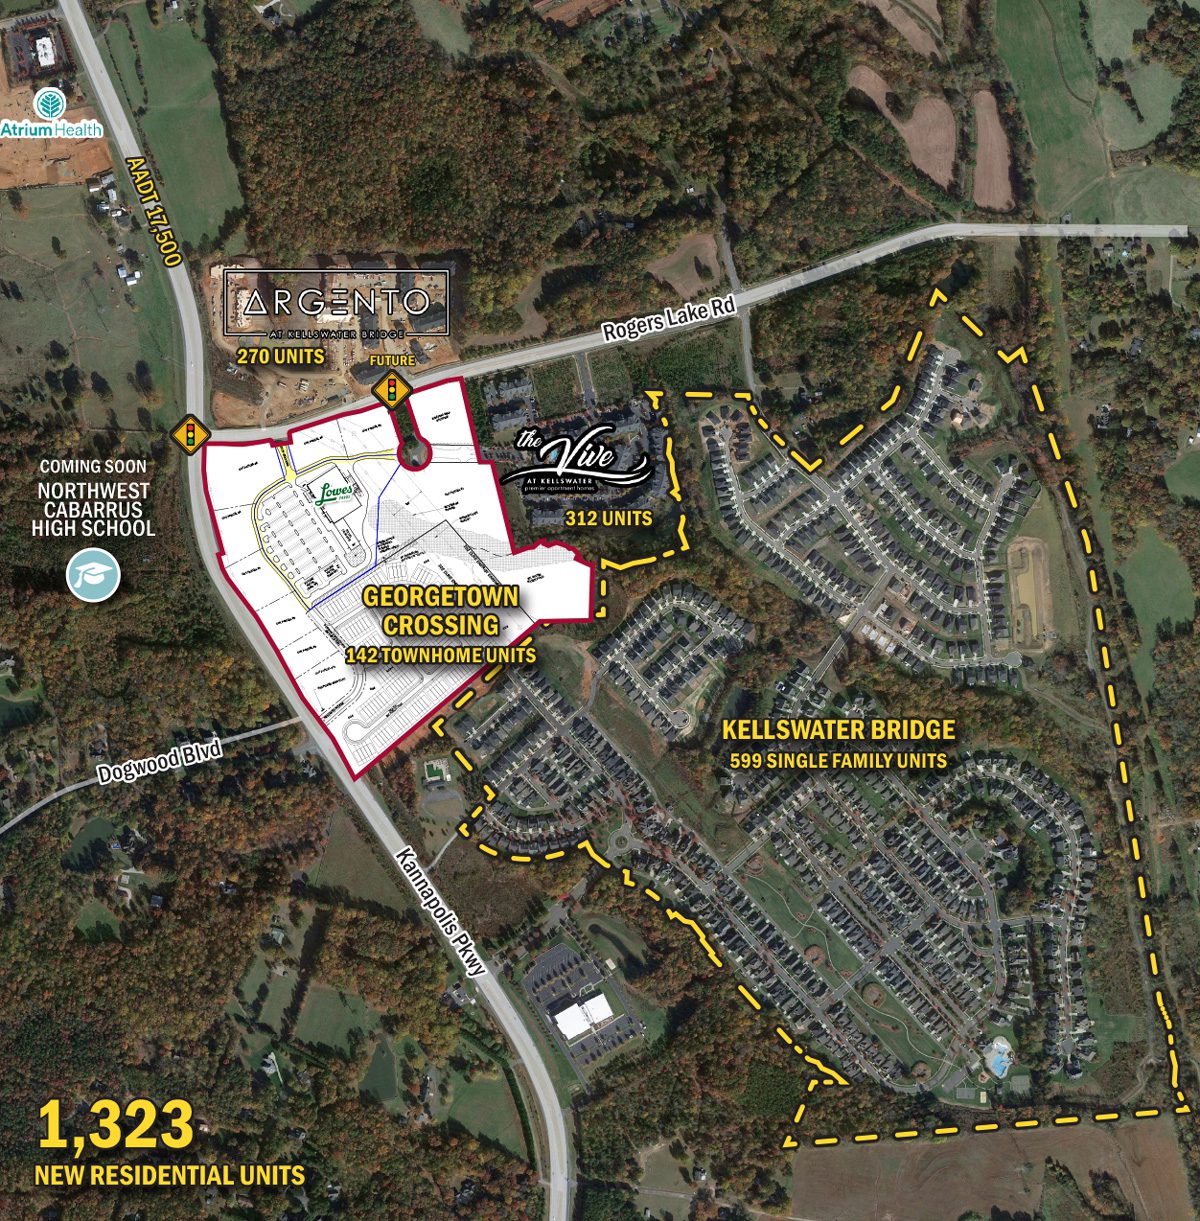 Kellswater Commons retail site plan overlay and nearby retail